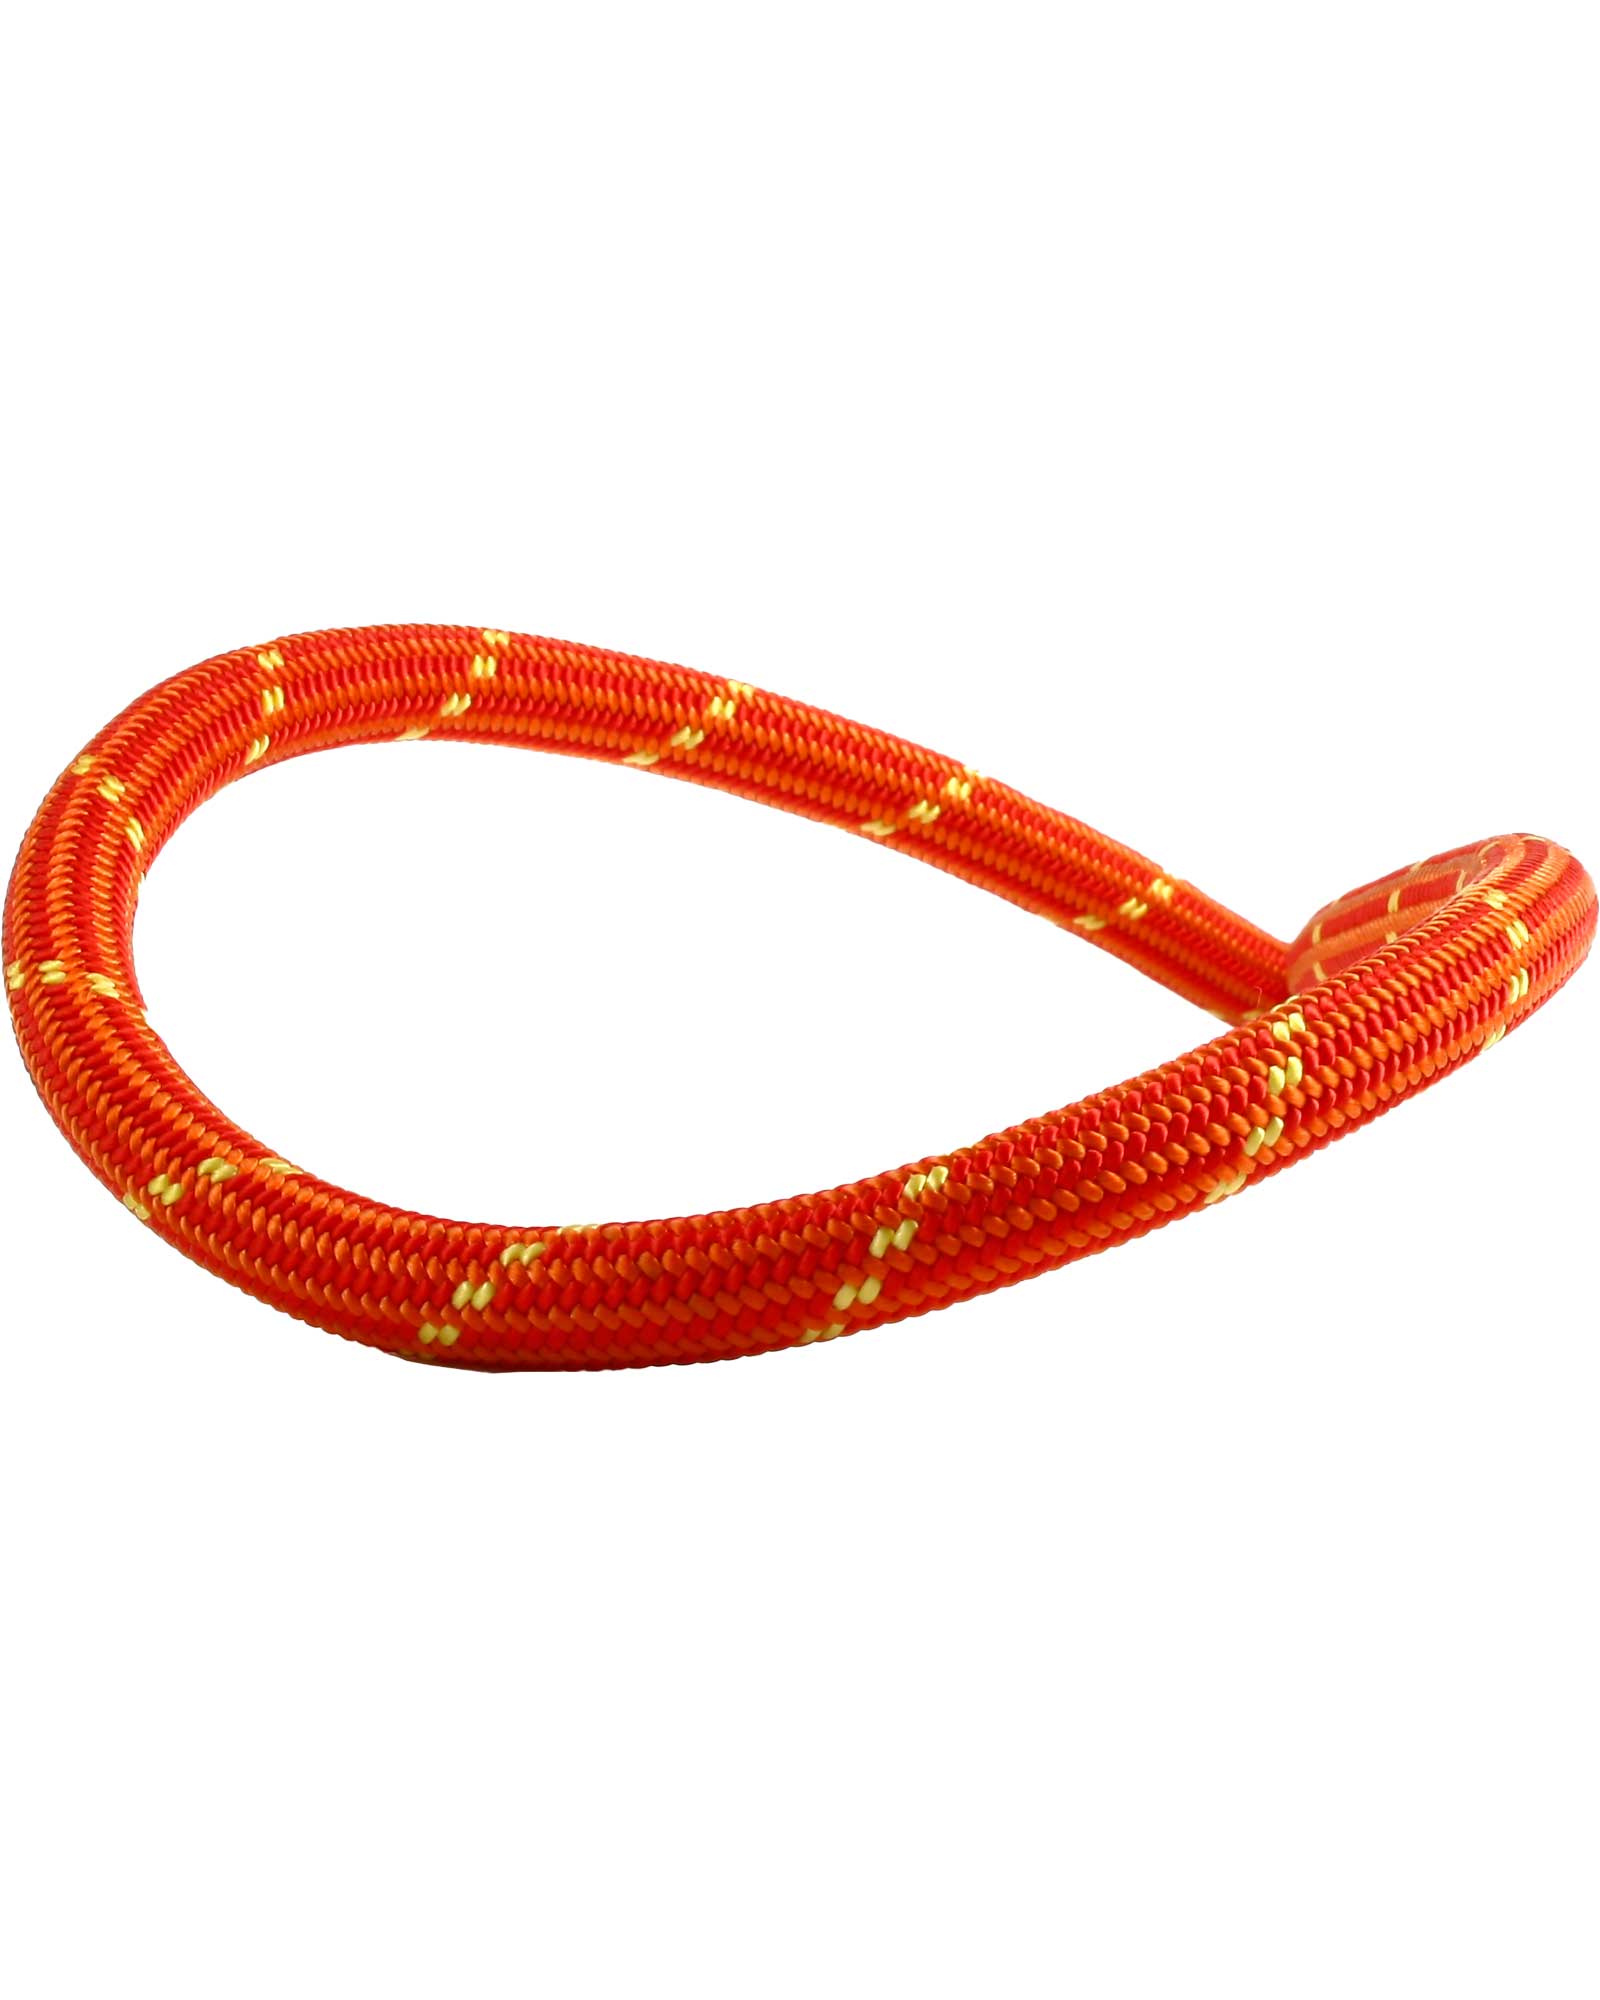 Edelweiss Energy 9.5mm x 70m Rope 0